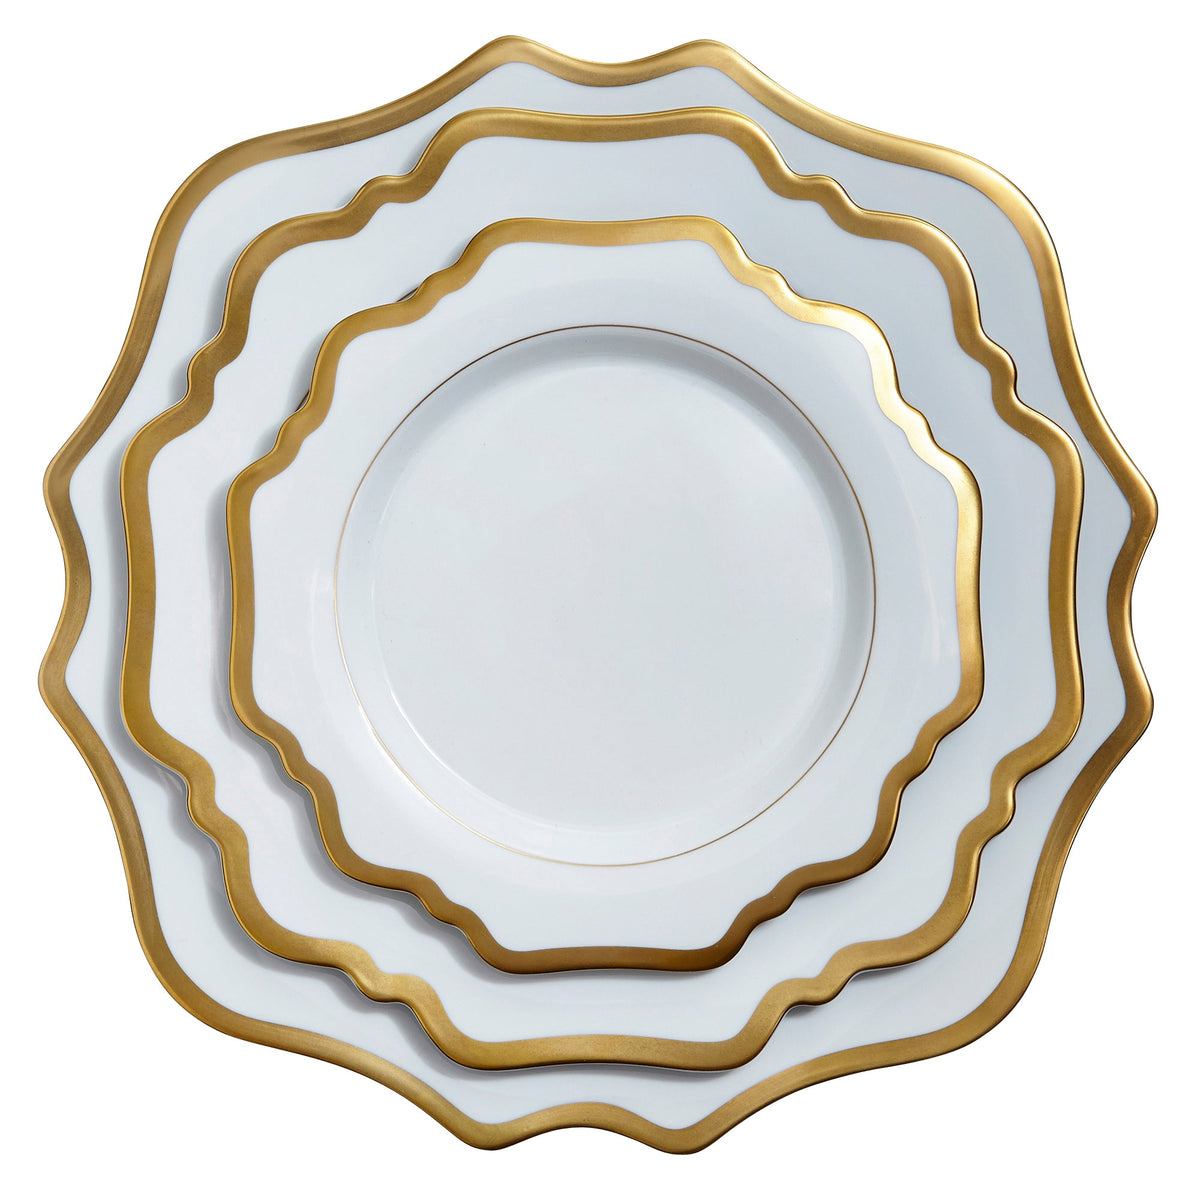 Antique White and Gold Charger Plate